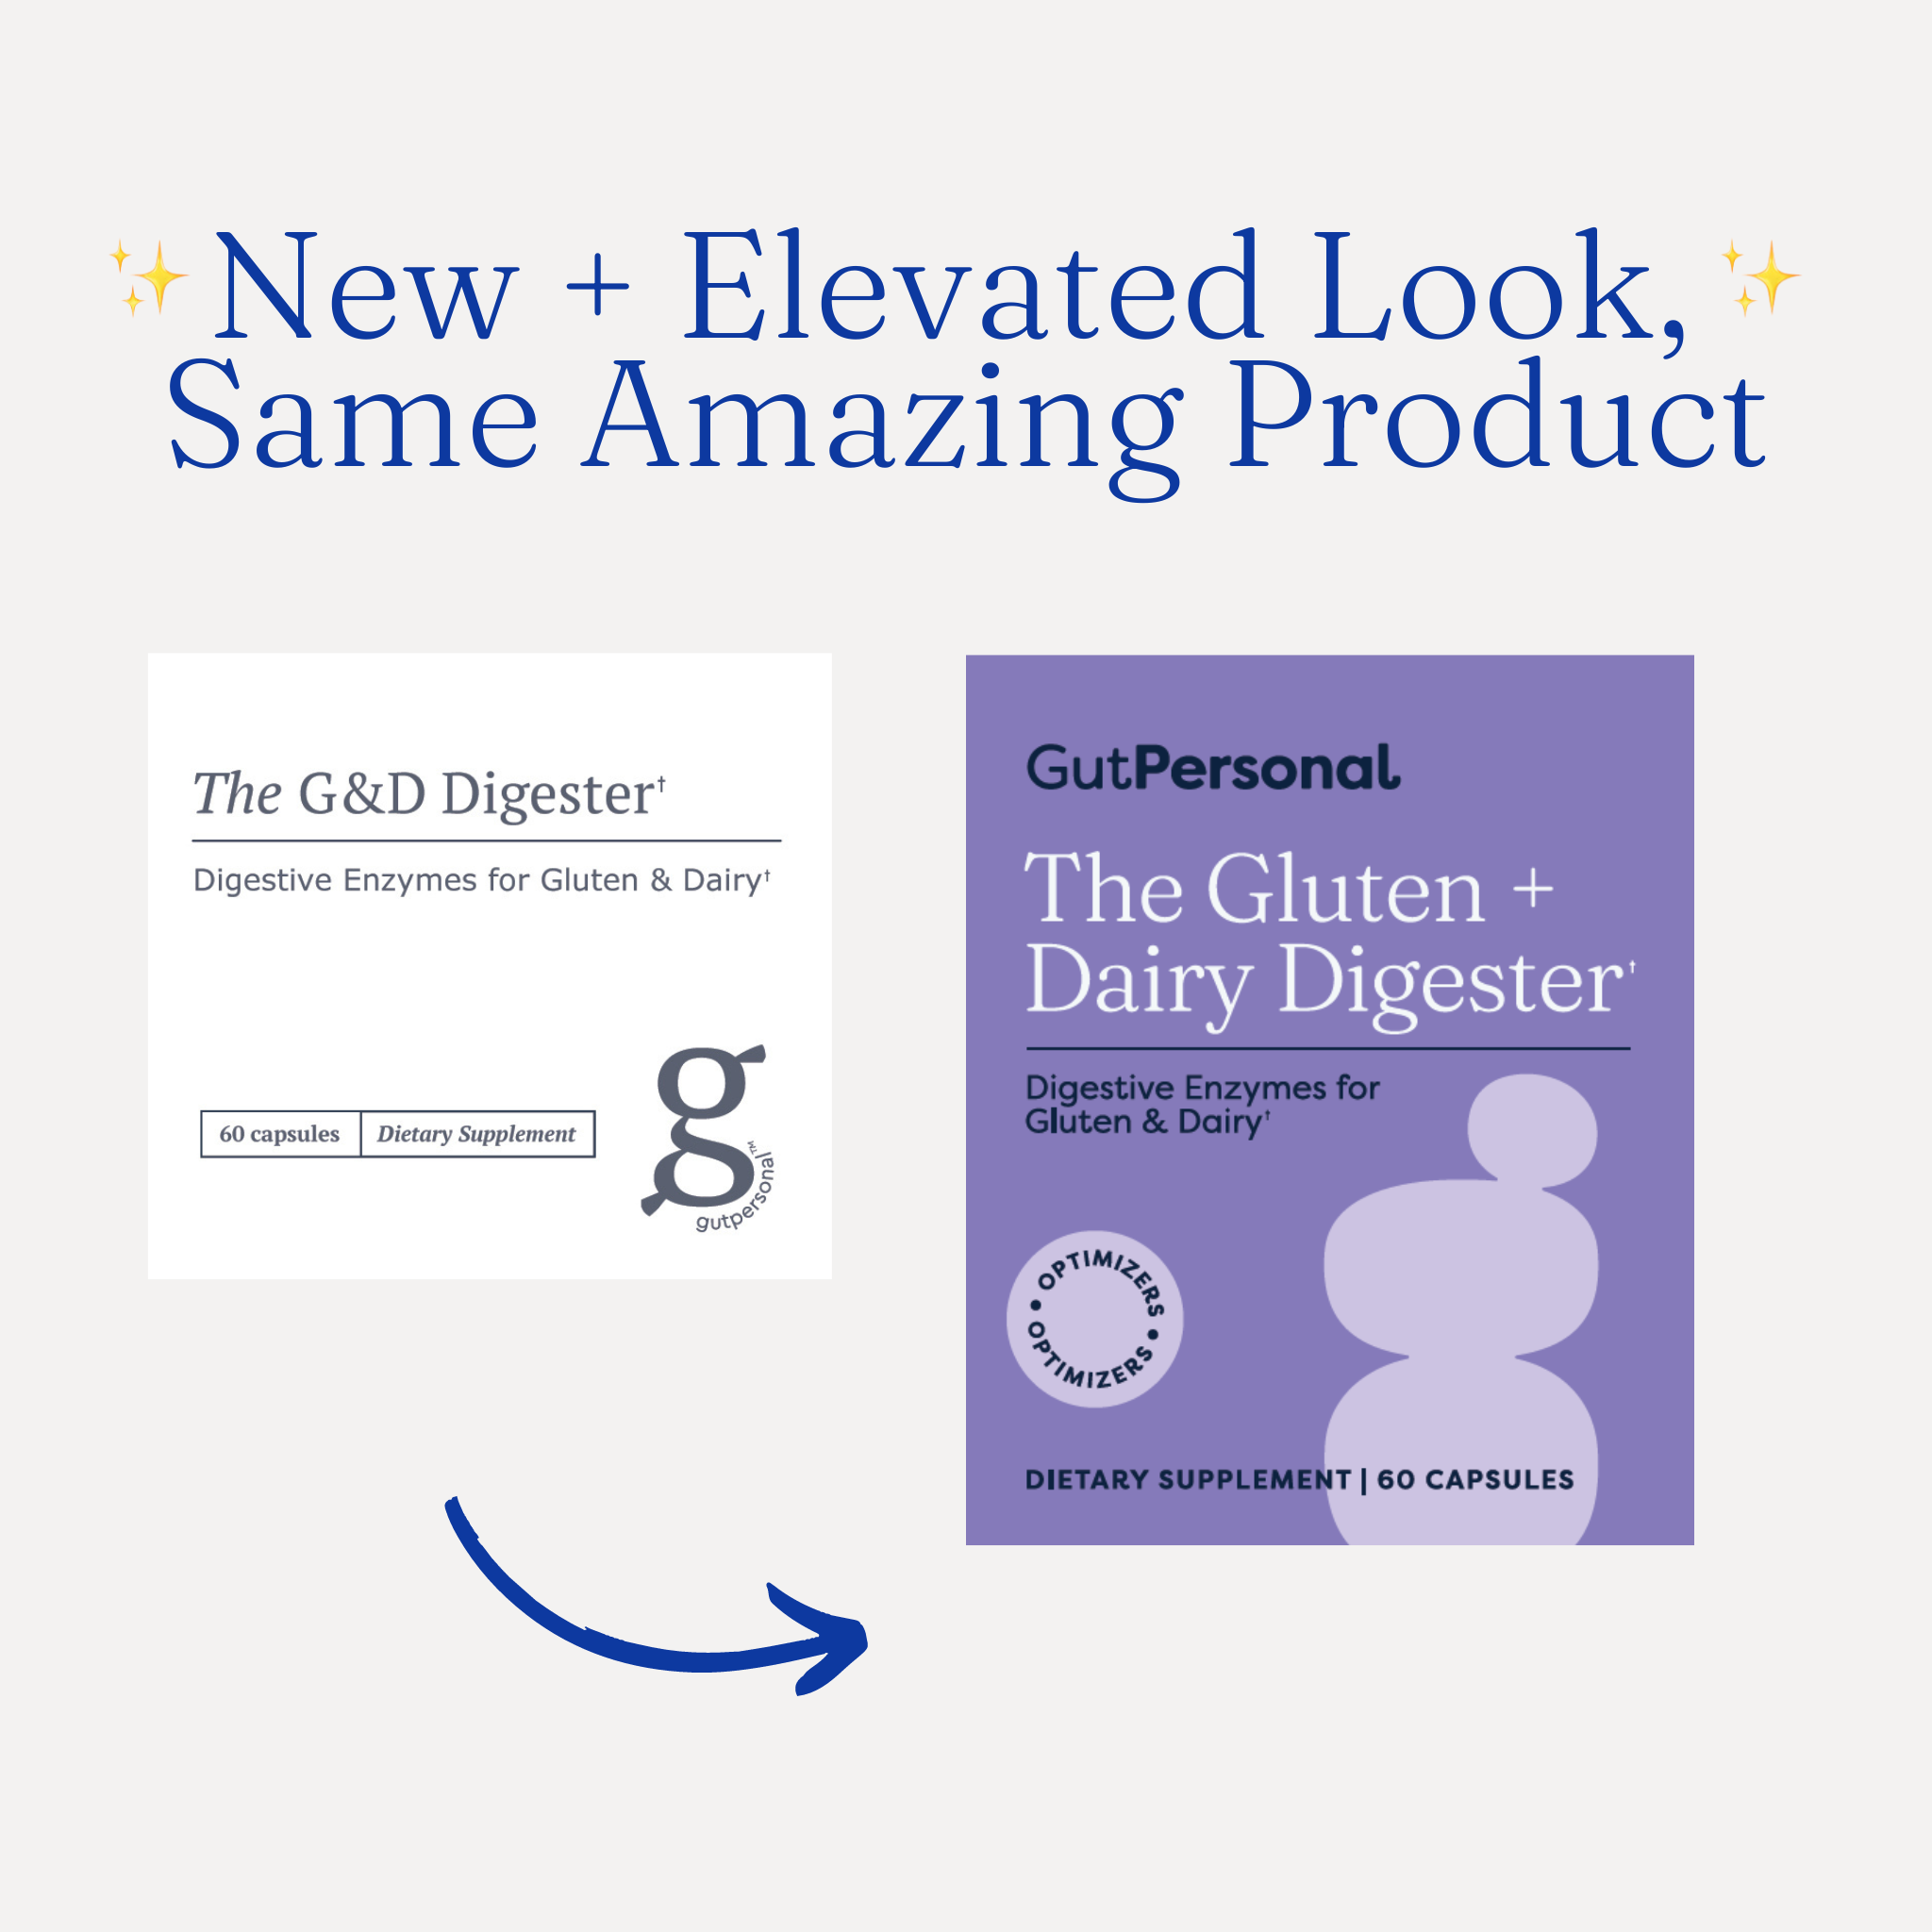 The Gluten+ Dairy Digester: Digestive Enzymes for Gluten & Dairy